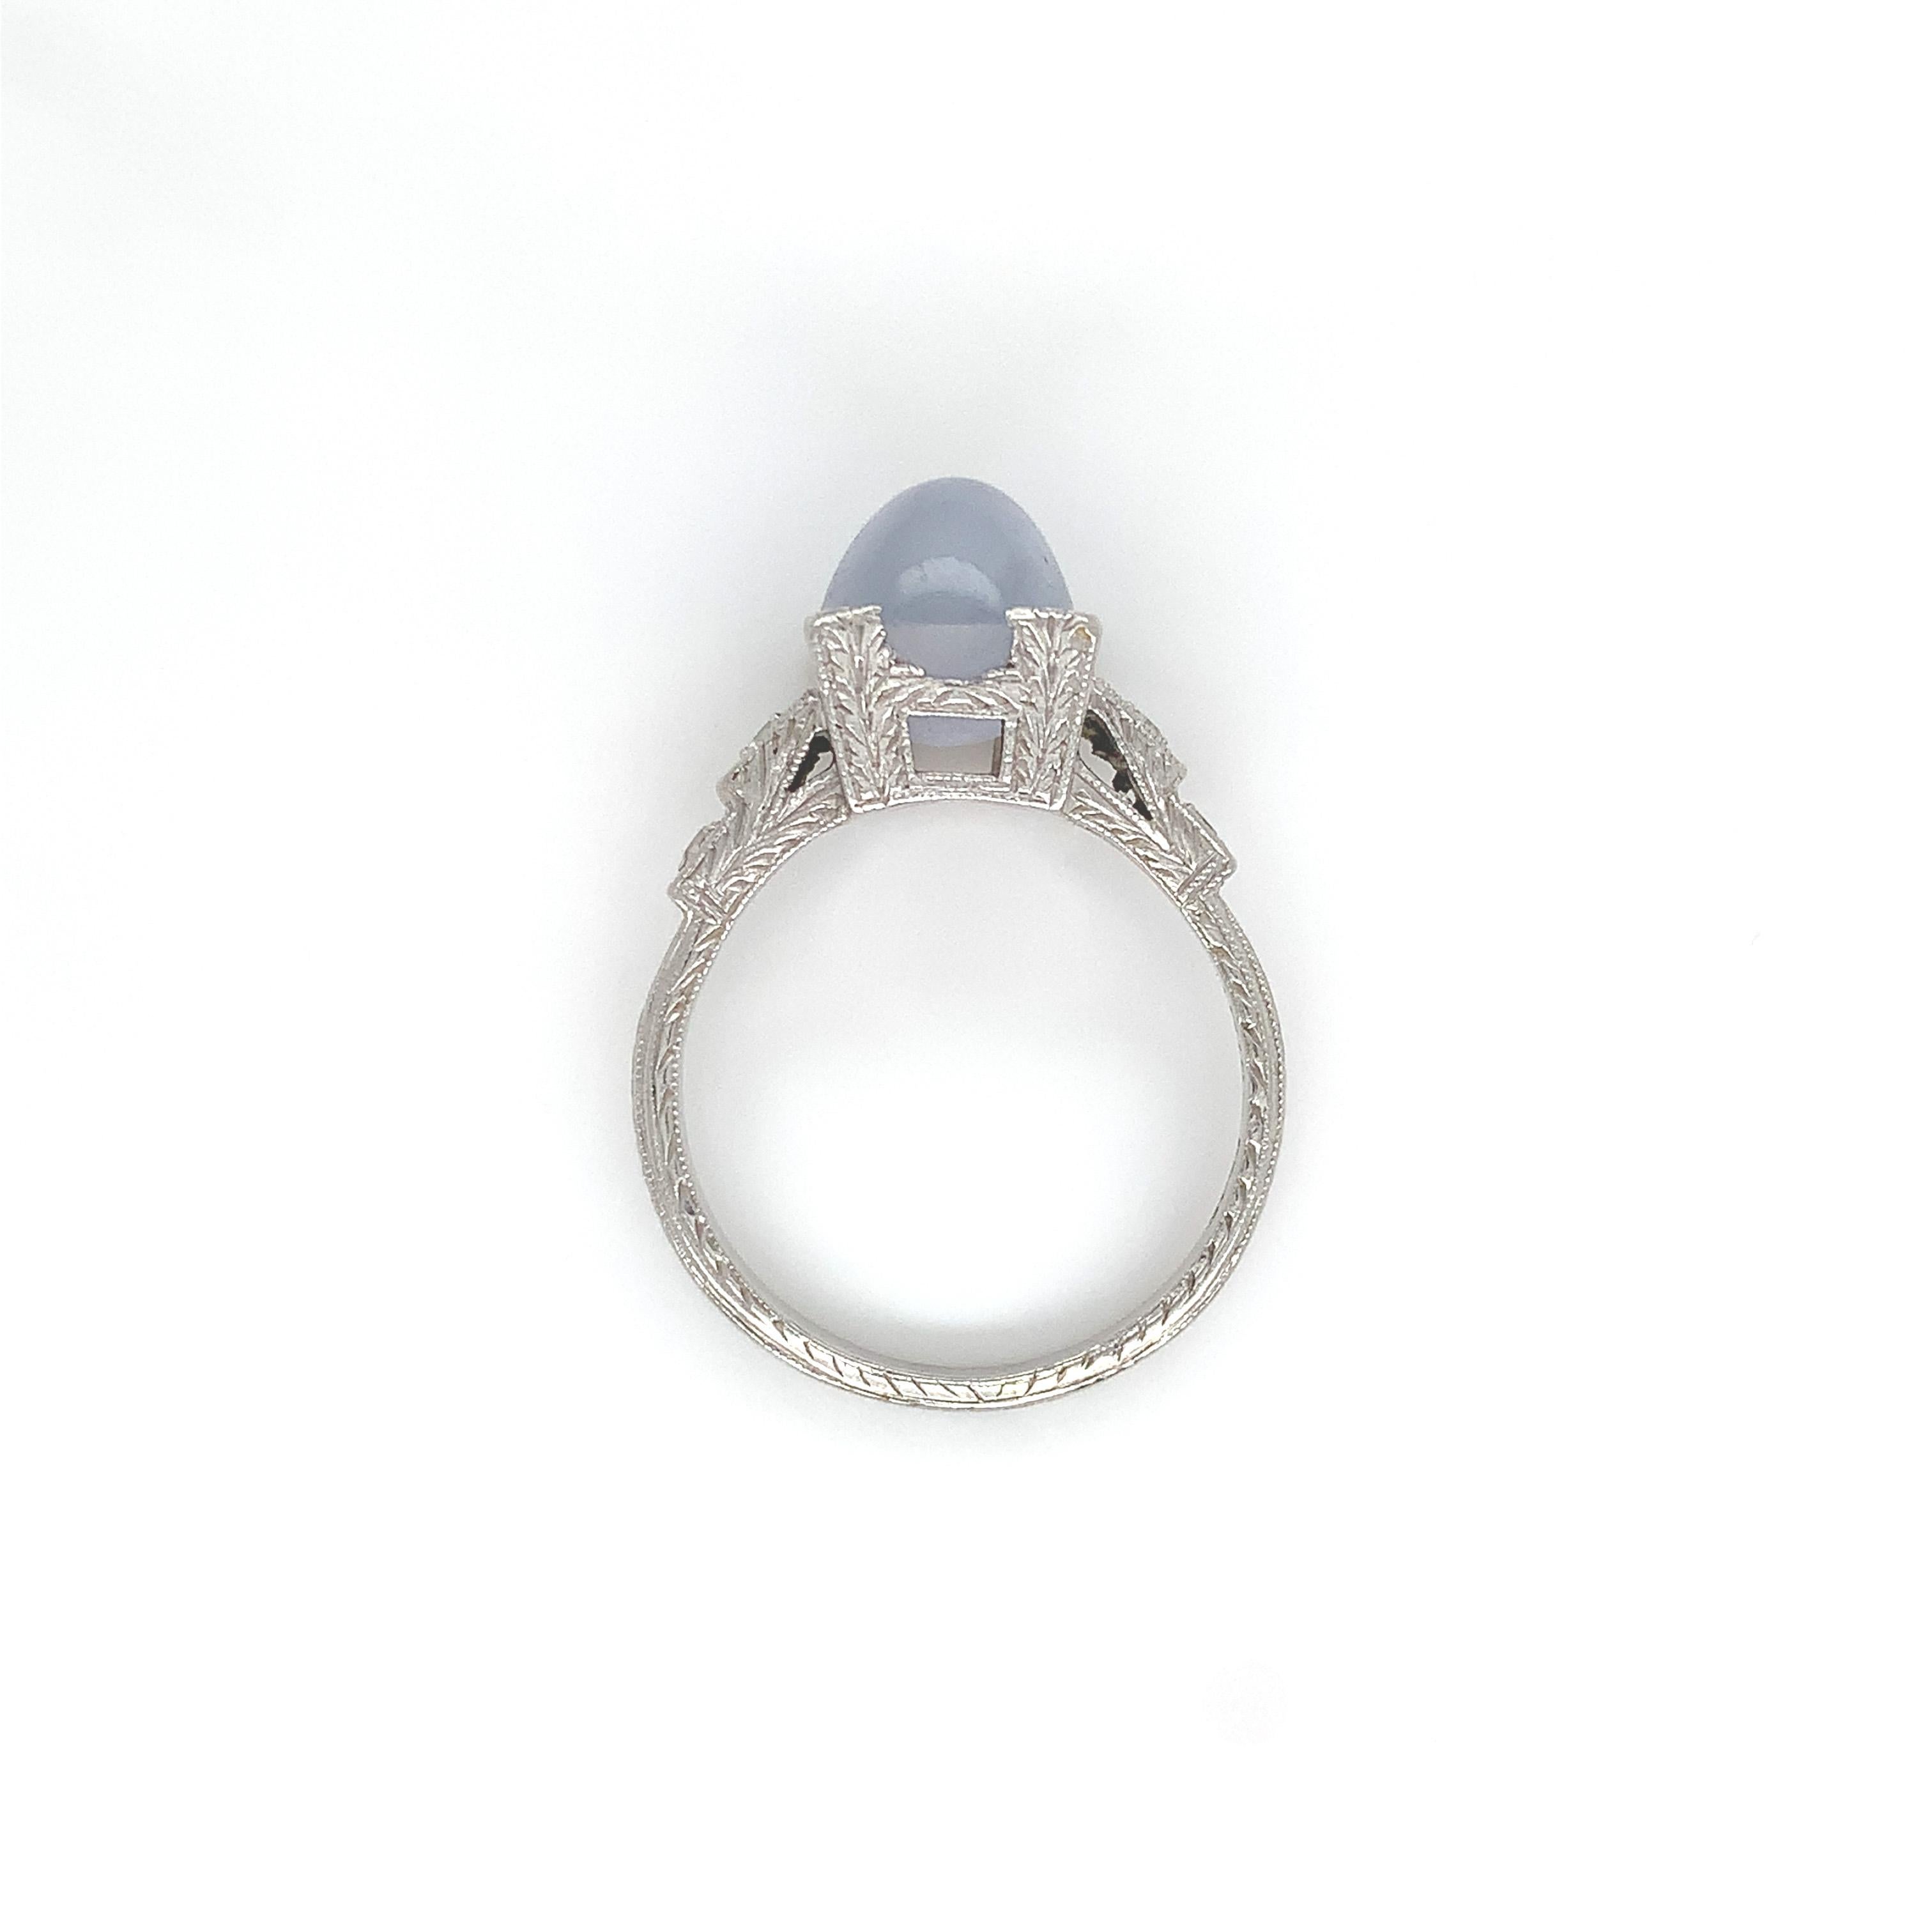 Platinum ring featuring a light blue/gray cabochon star sapphire. The sapphire measures about 8.7mm x 7.2mm. There are 4 small round diamond accents, 2 measuring about 1.8mm and 2 about 1.5mm. The platinum setting is hand engraved on 3 sides and